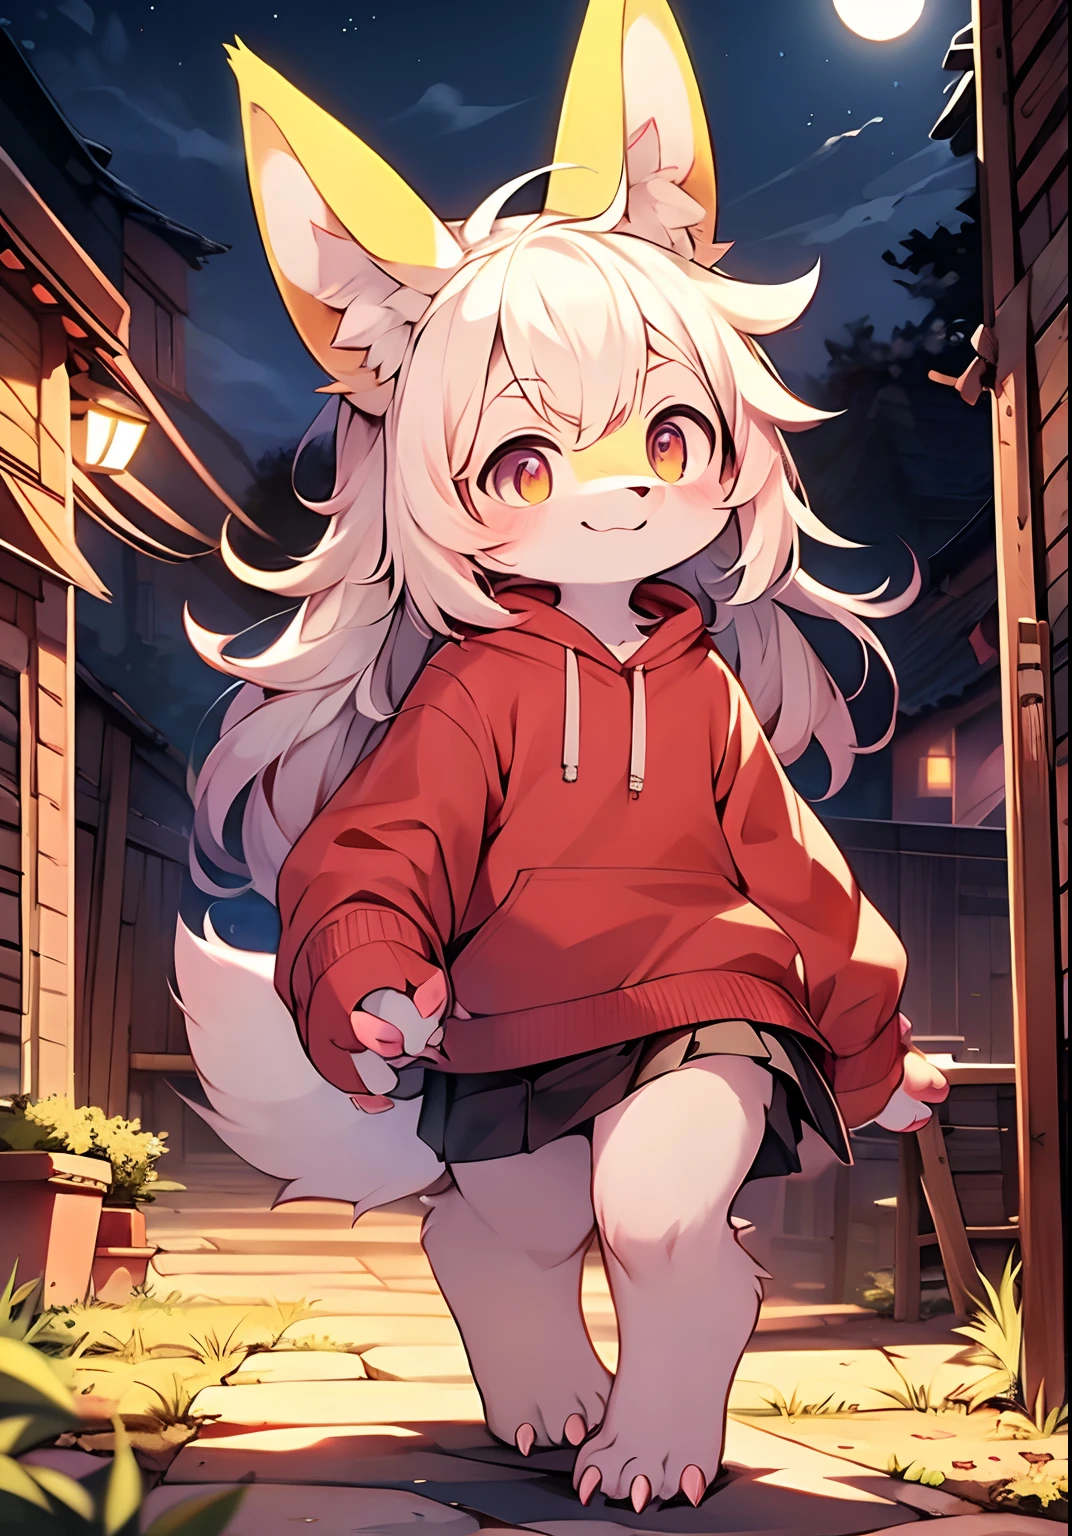 Furry ，Fluffy tail，Emphasis on white fur，Delicate fur，Cute toddler，Short pink skirt，Young， and cute emphasis，Walking posture，Detailed characters，A smile on his face（1.2），Protruding claws，Pink meat pad，Enhance long-haired animals（1.2），the night，pays（1.1）。solo，solo person